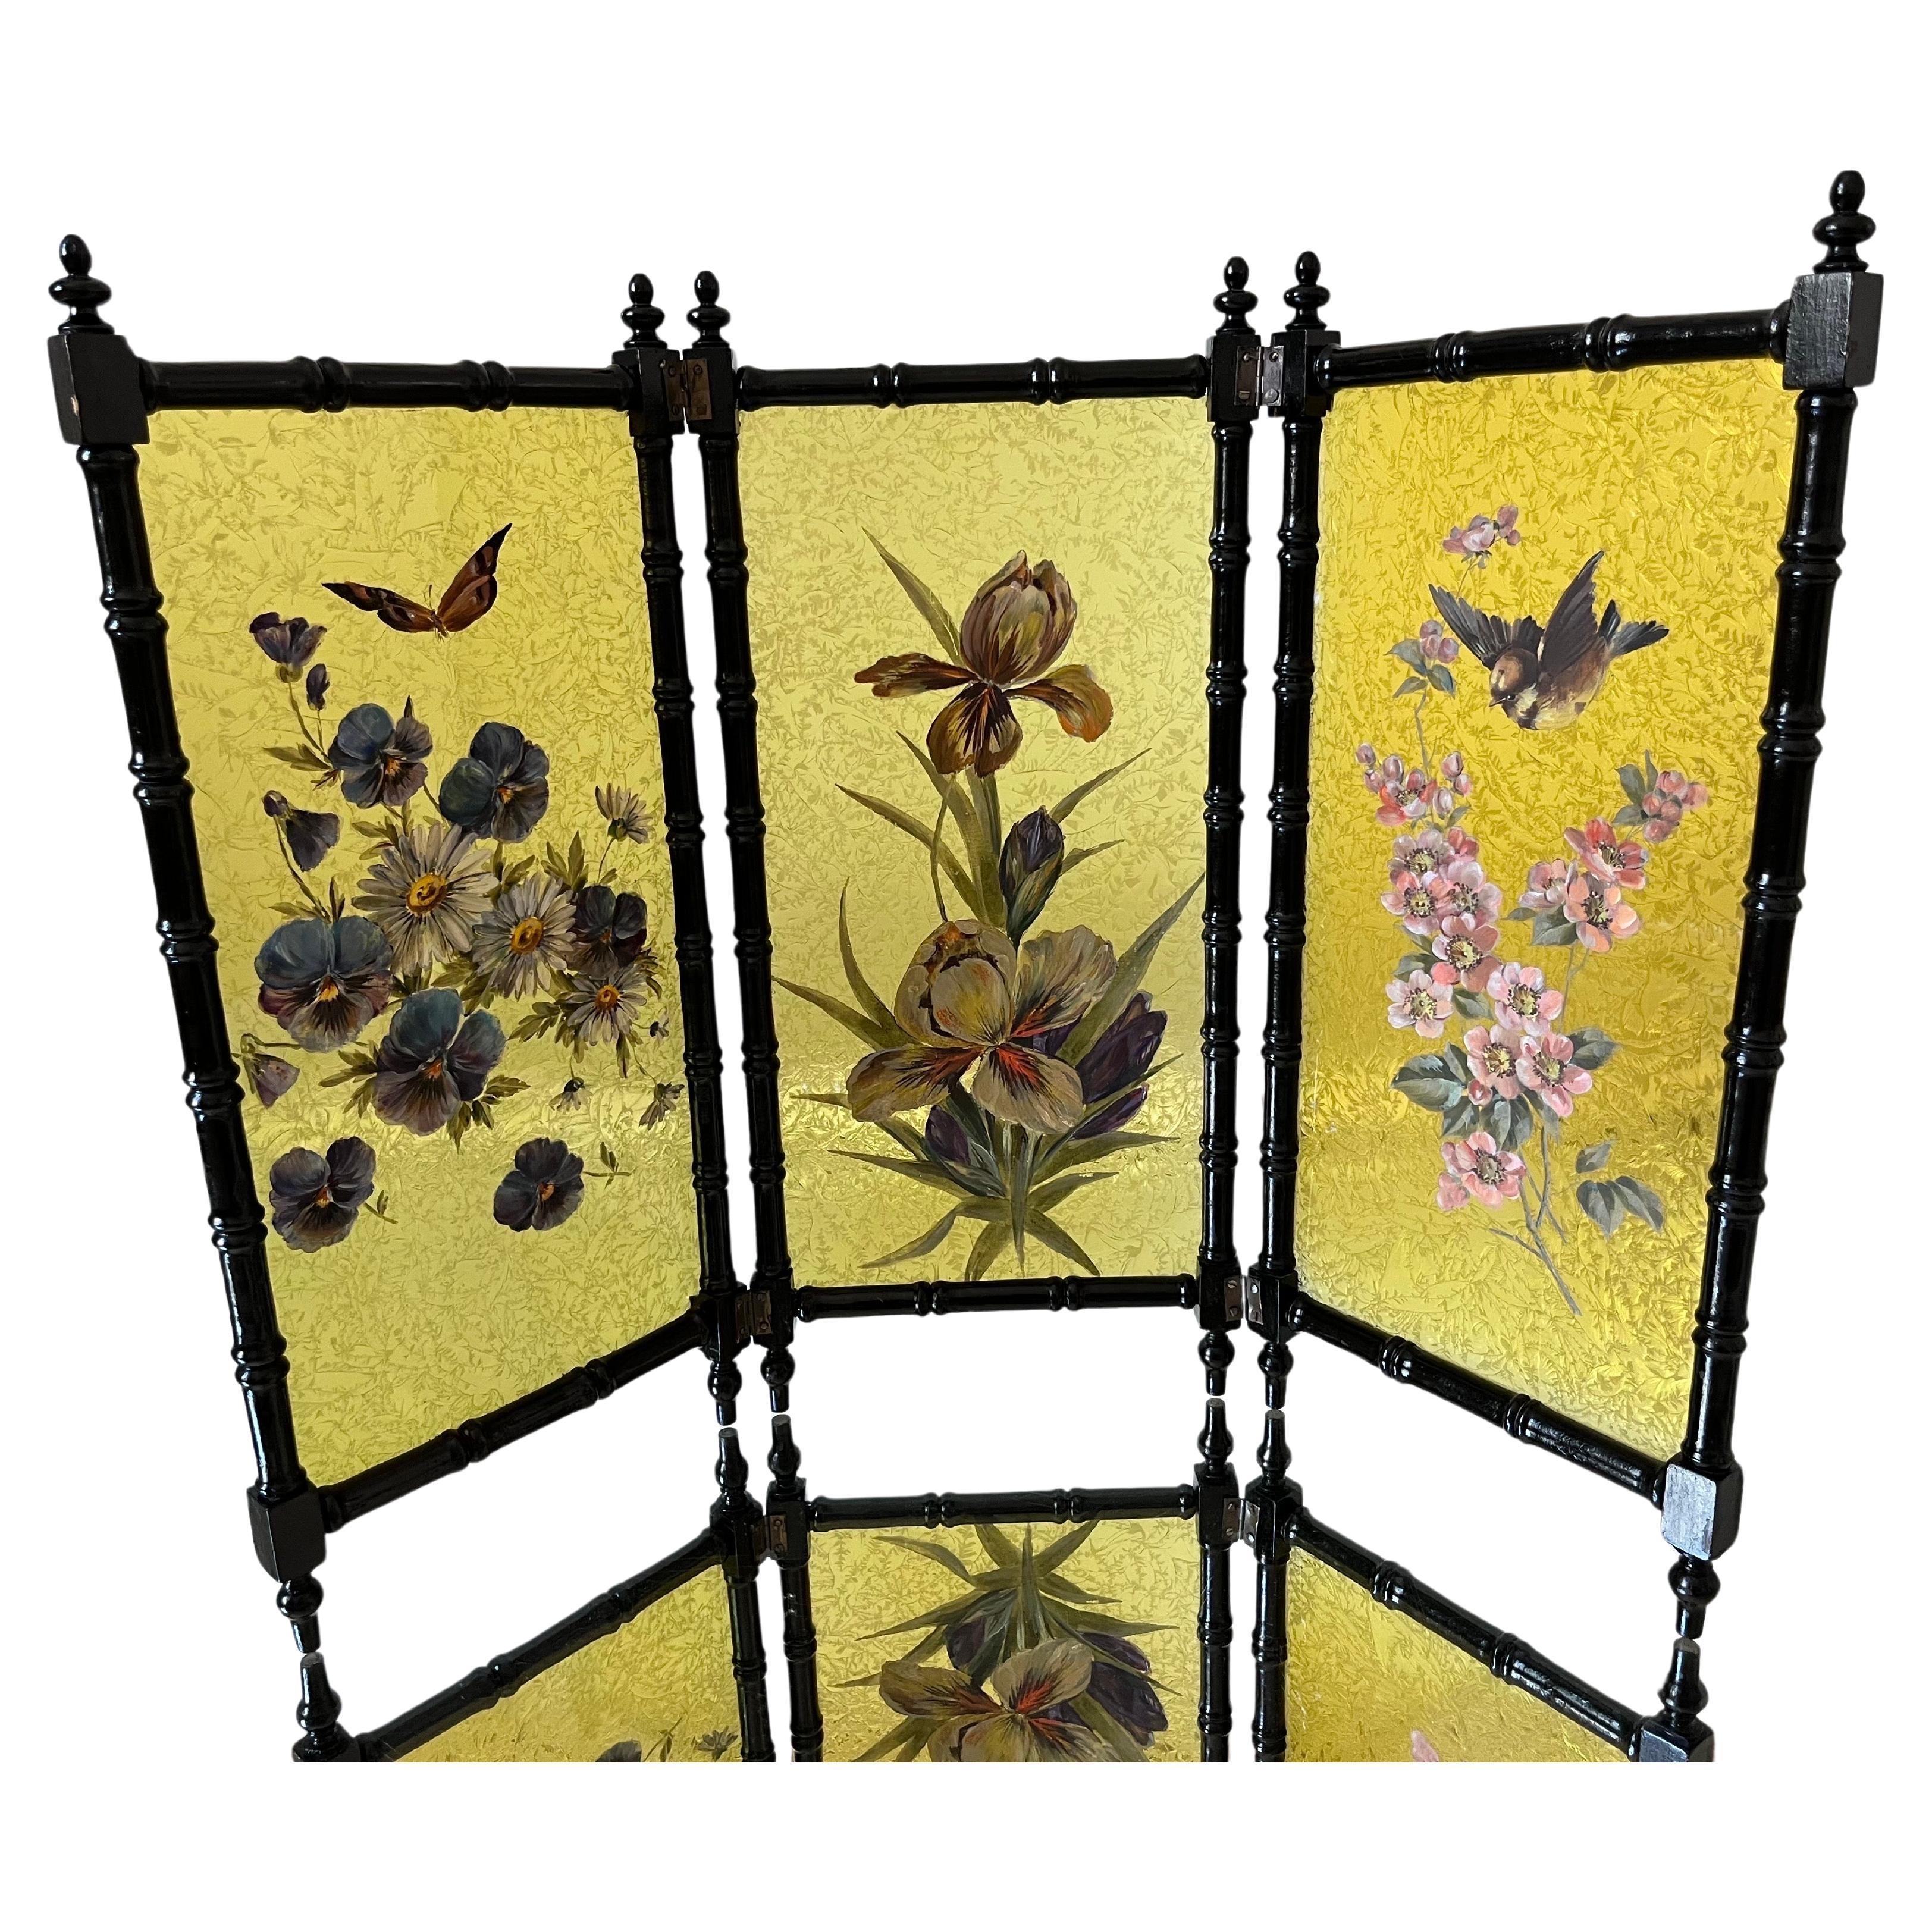 Antique Swedish Hand-Painted Decorative Three-Panel Glass Screen For Sale